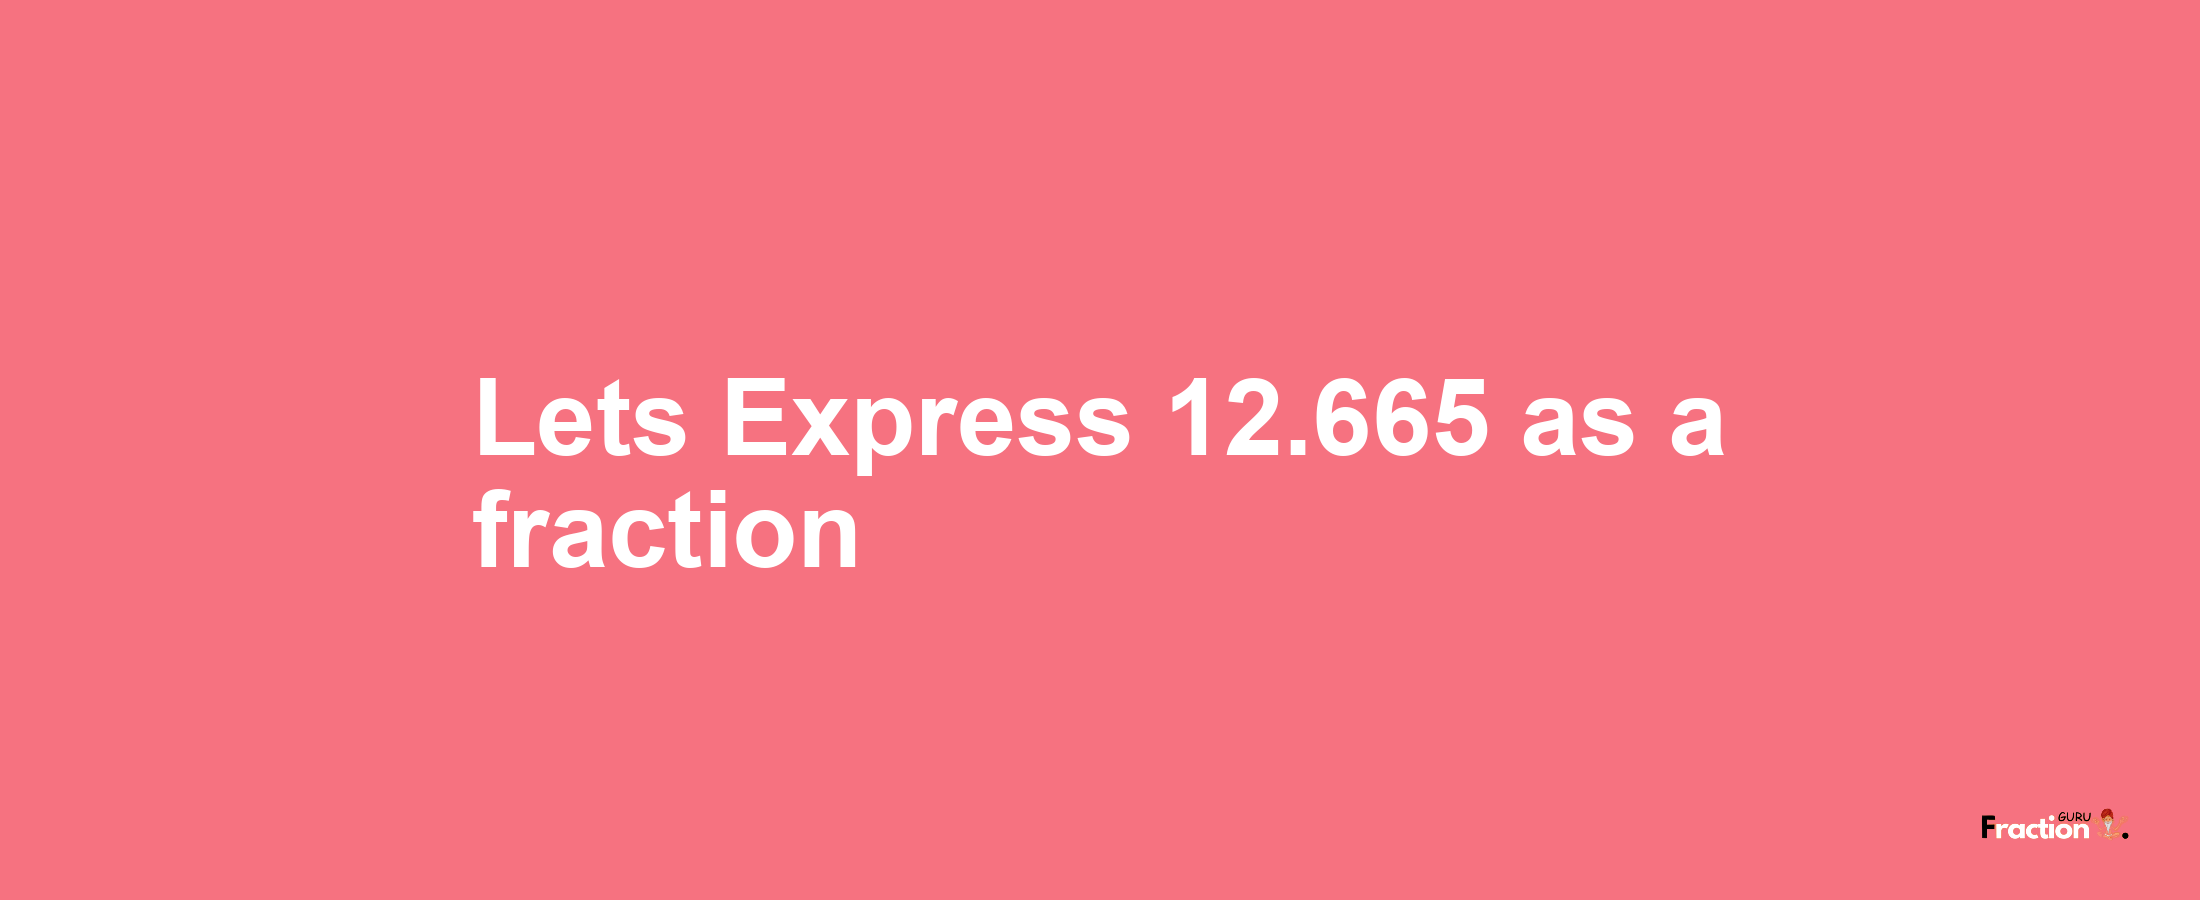 Lets Express 12.665 as afraction